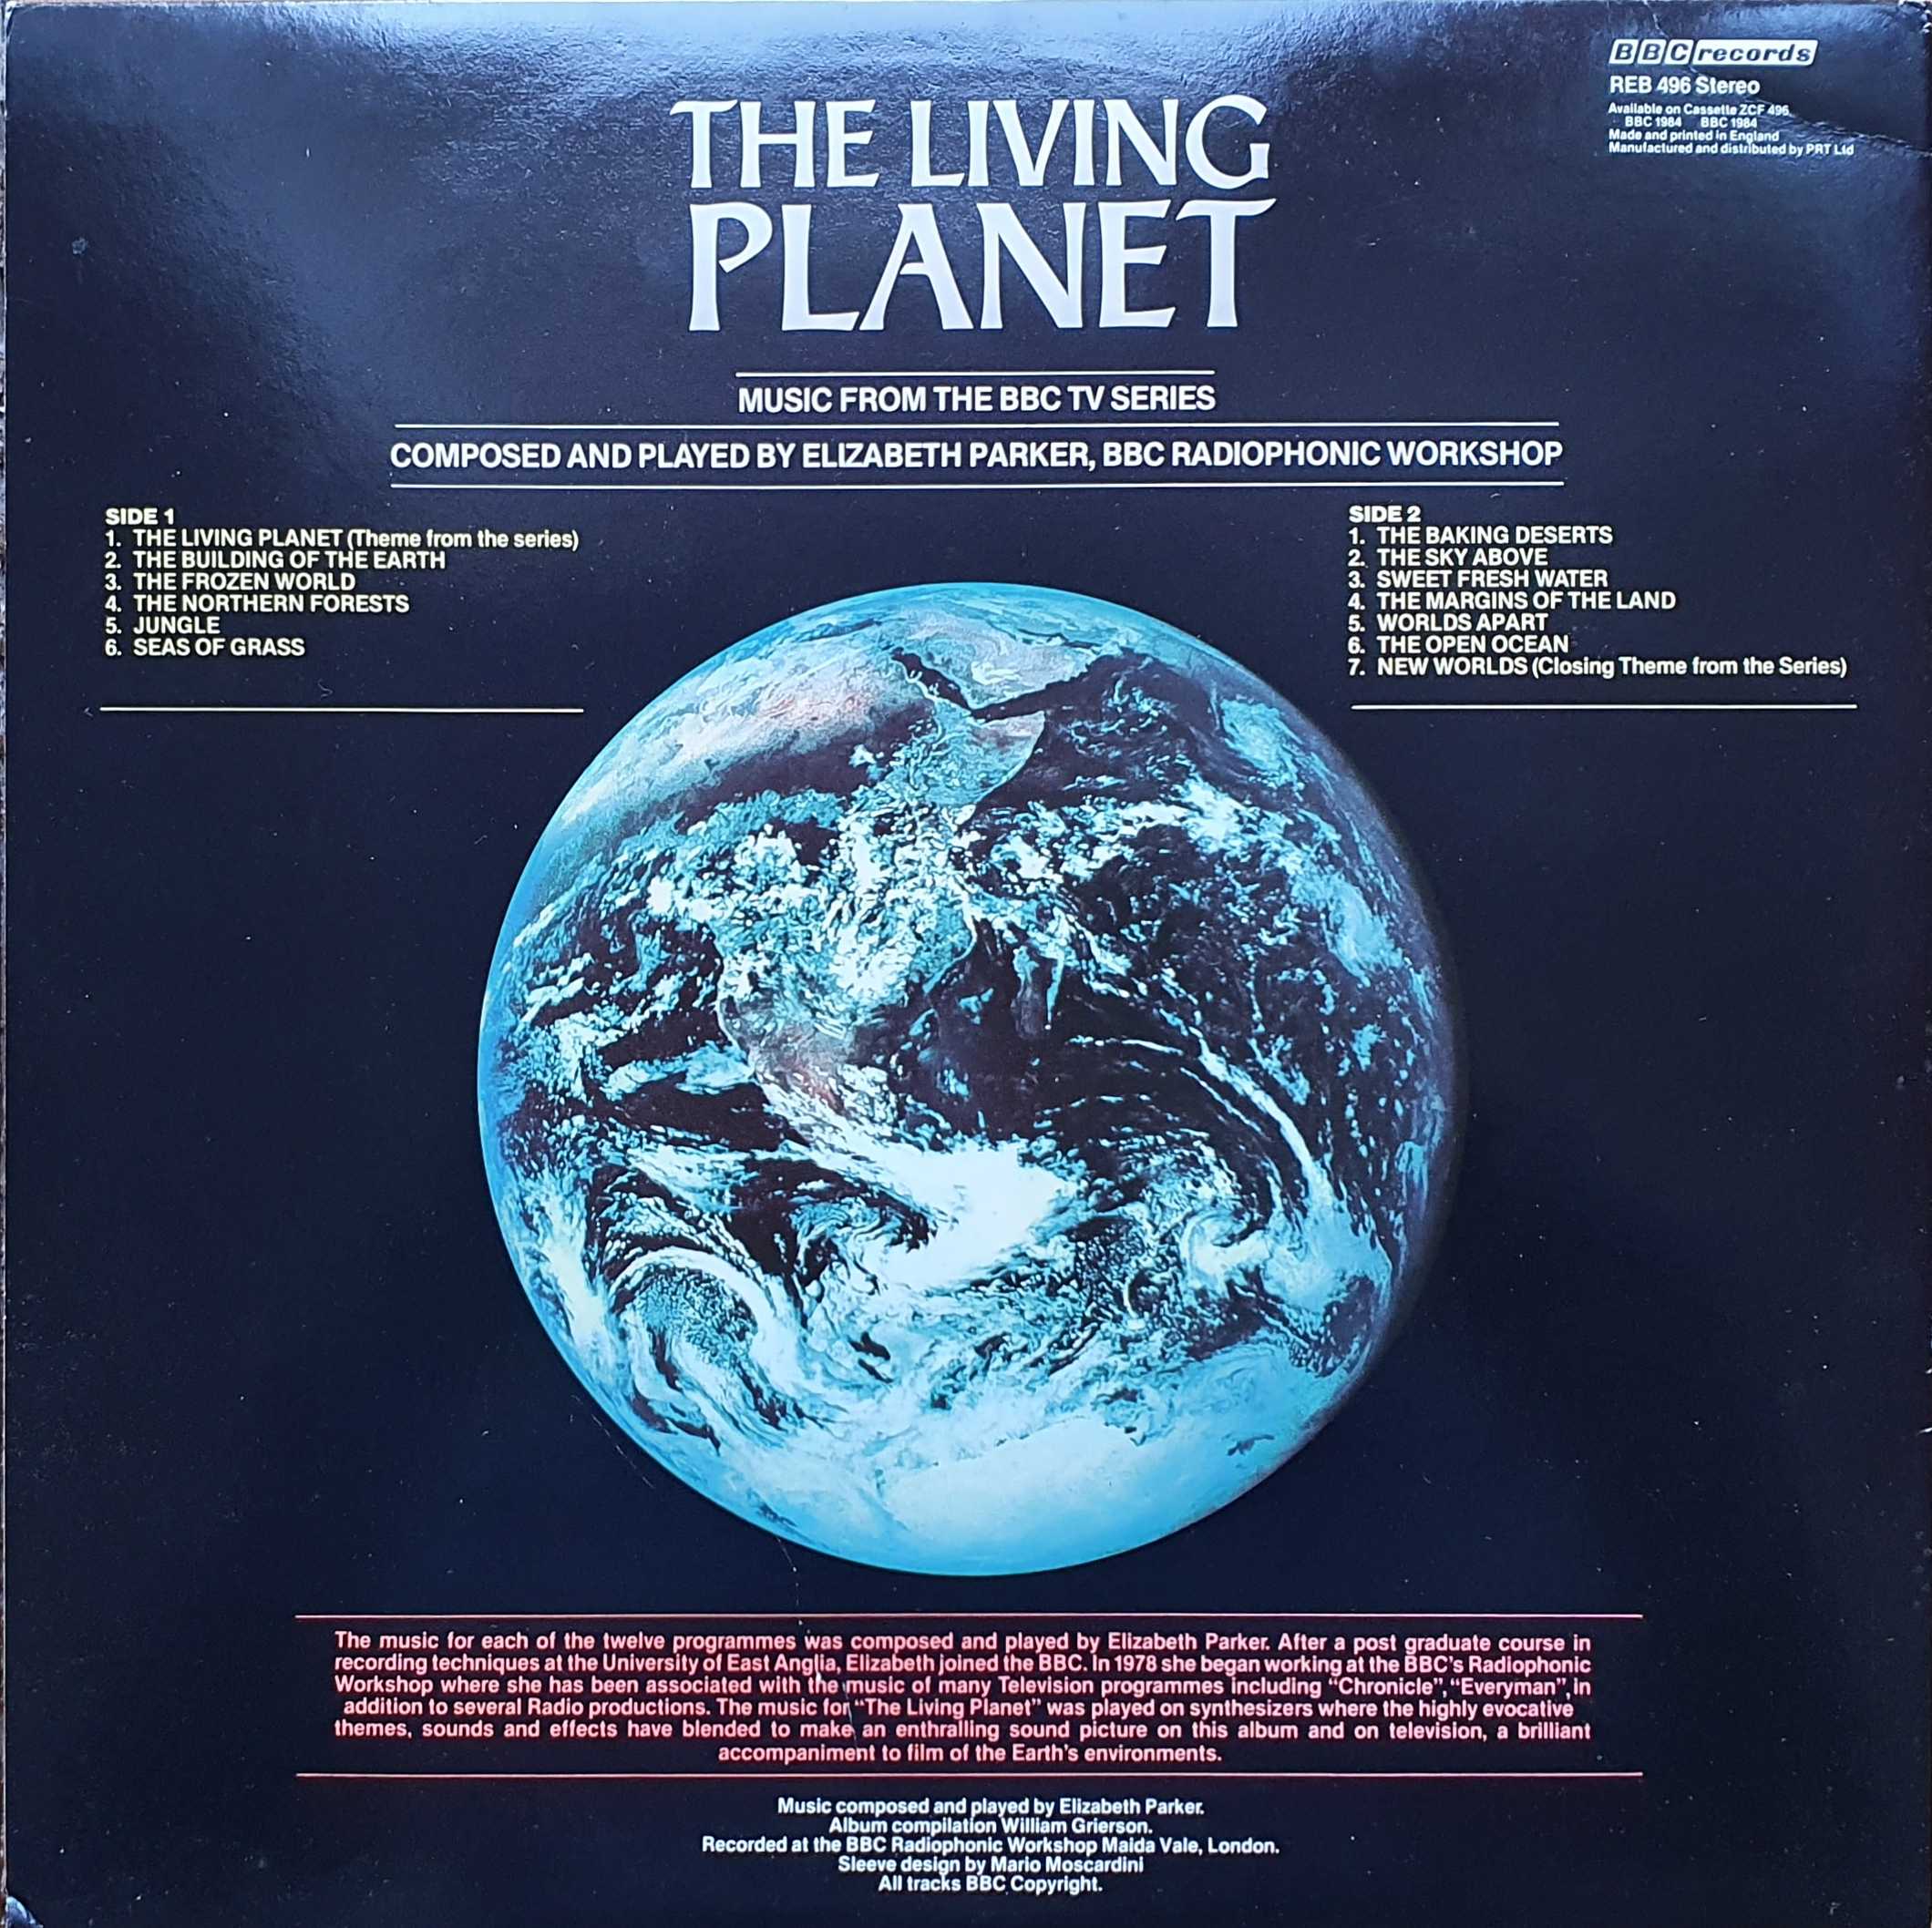 Picture of REB 496 The living planet by artist Elizabeth Parker and the BBC Radiophonic Workshop from the BBC records and Tapes library